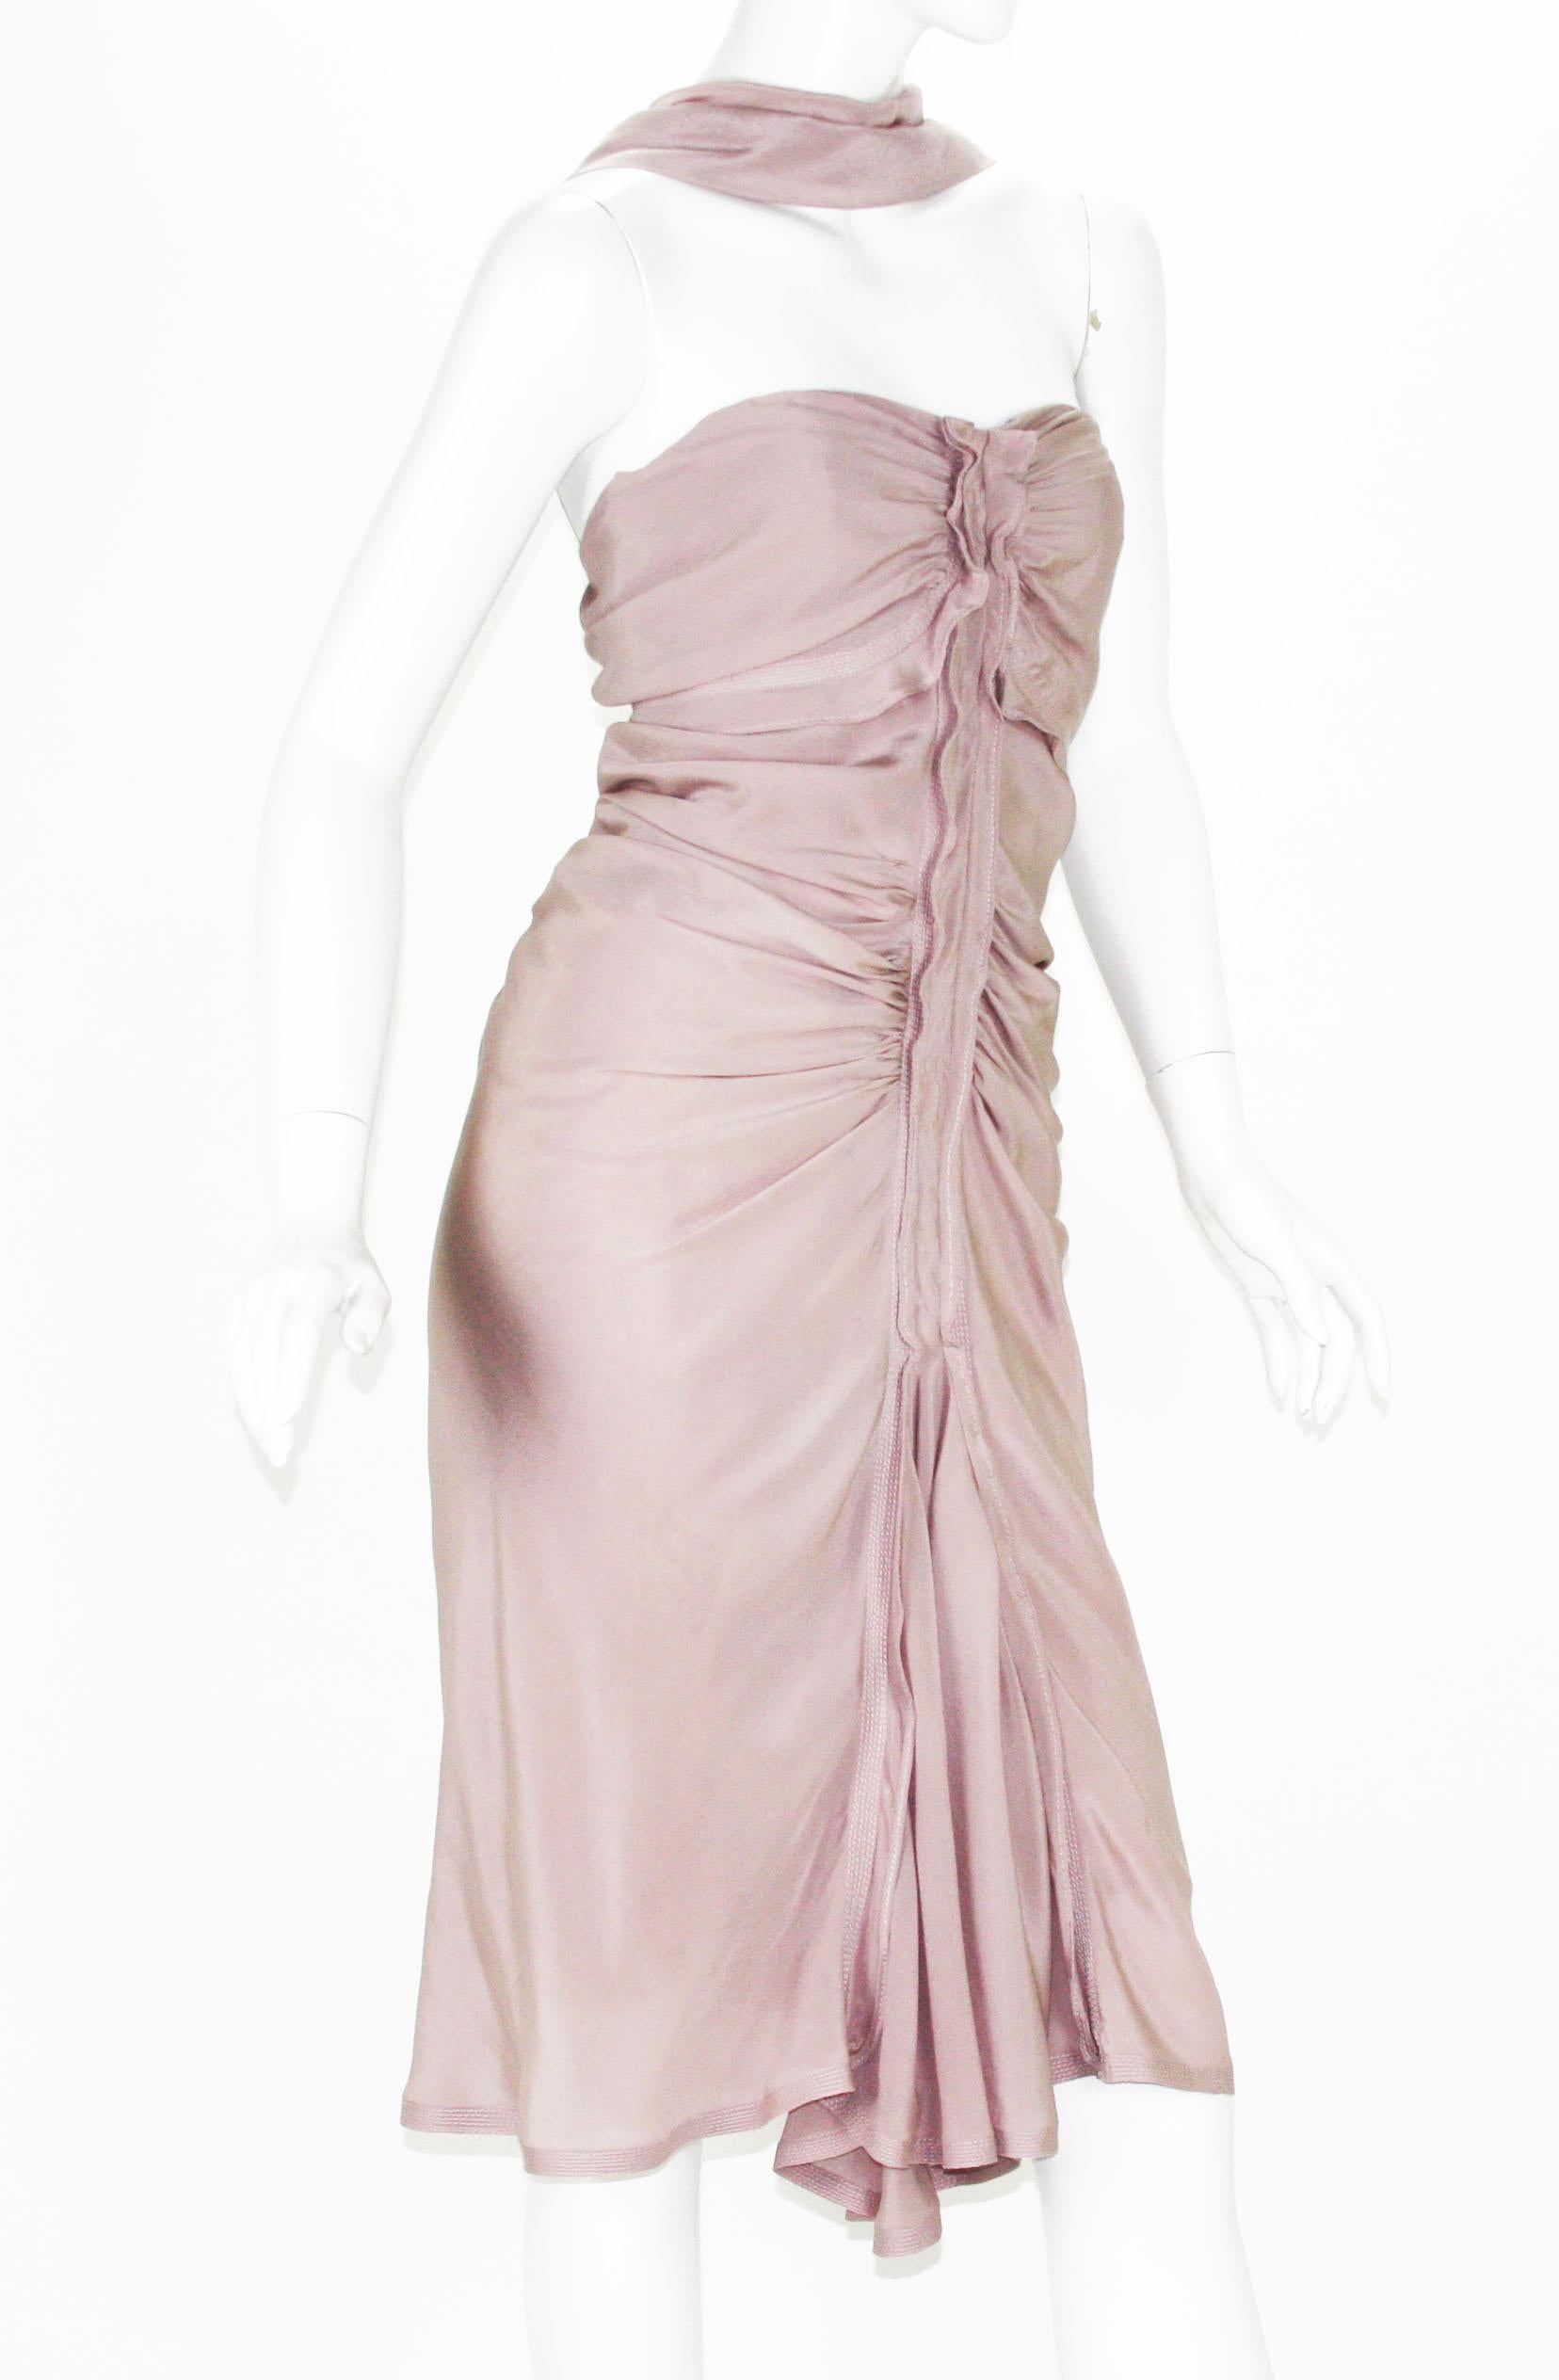 Tom Ford for Yves Saint Laurent Rive Gauche Draped Silk Cocktail Dress
Fall/Winter 2003 Collection
Fr. size 38 - US 6
100% Silk, Rare Mauve Color, Light Weight Corset, Reverse Neckholer, Draping Details, Hand-Stitching Details, Fully Lined.
Made in